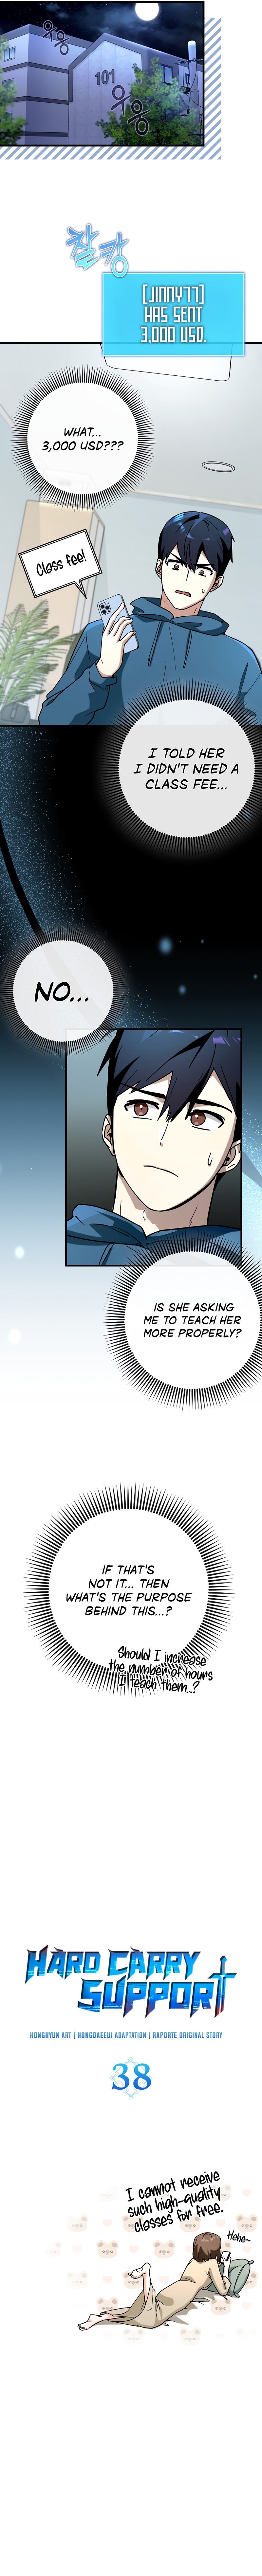 hard-carry-support-chap-38-4